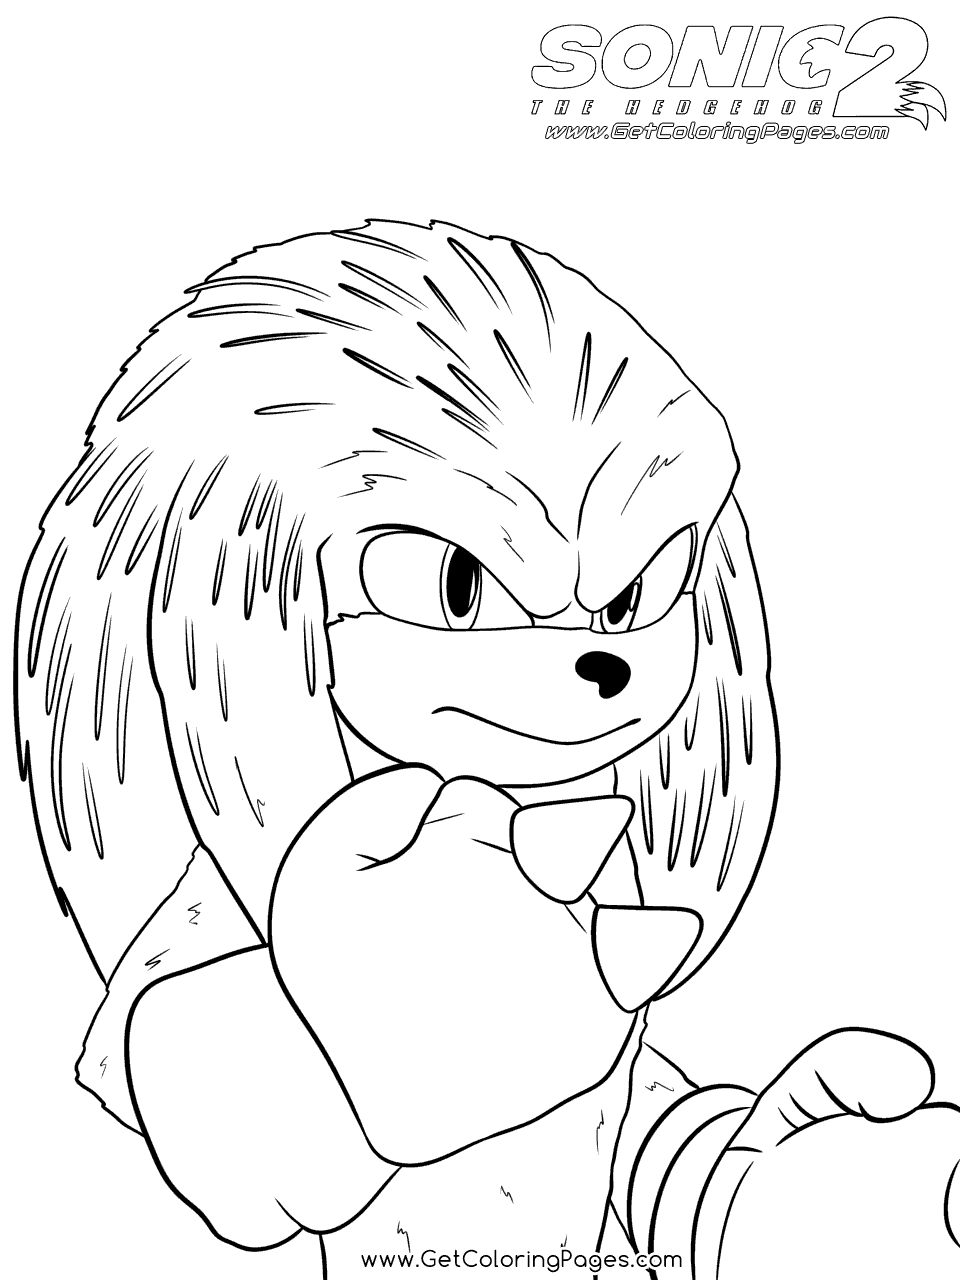 Sonic 2 Movie Coloring Pages Sonic Knuckles - Get Coloring Pages